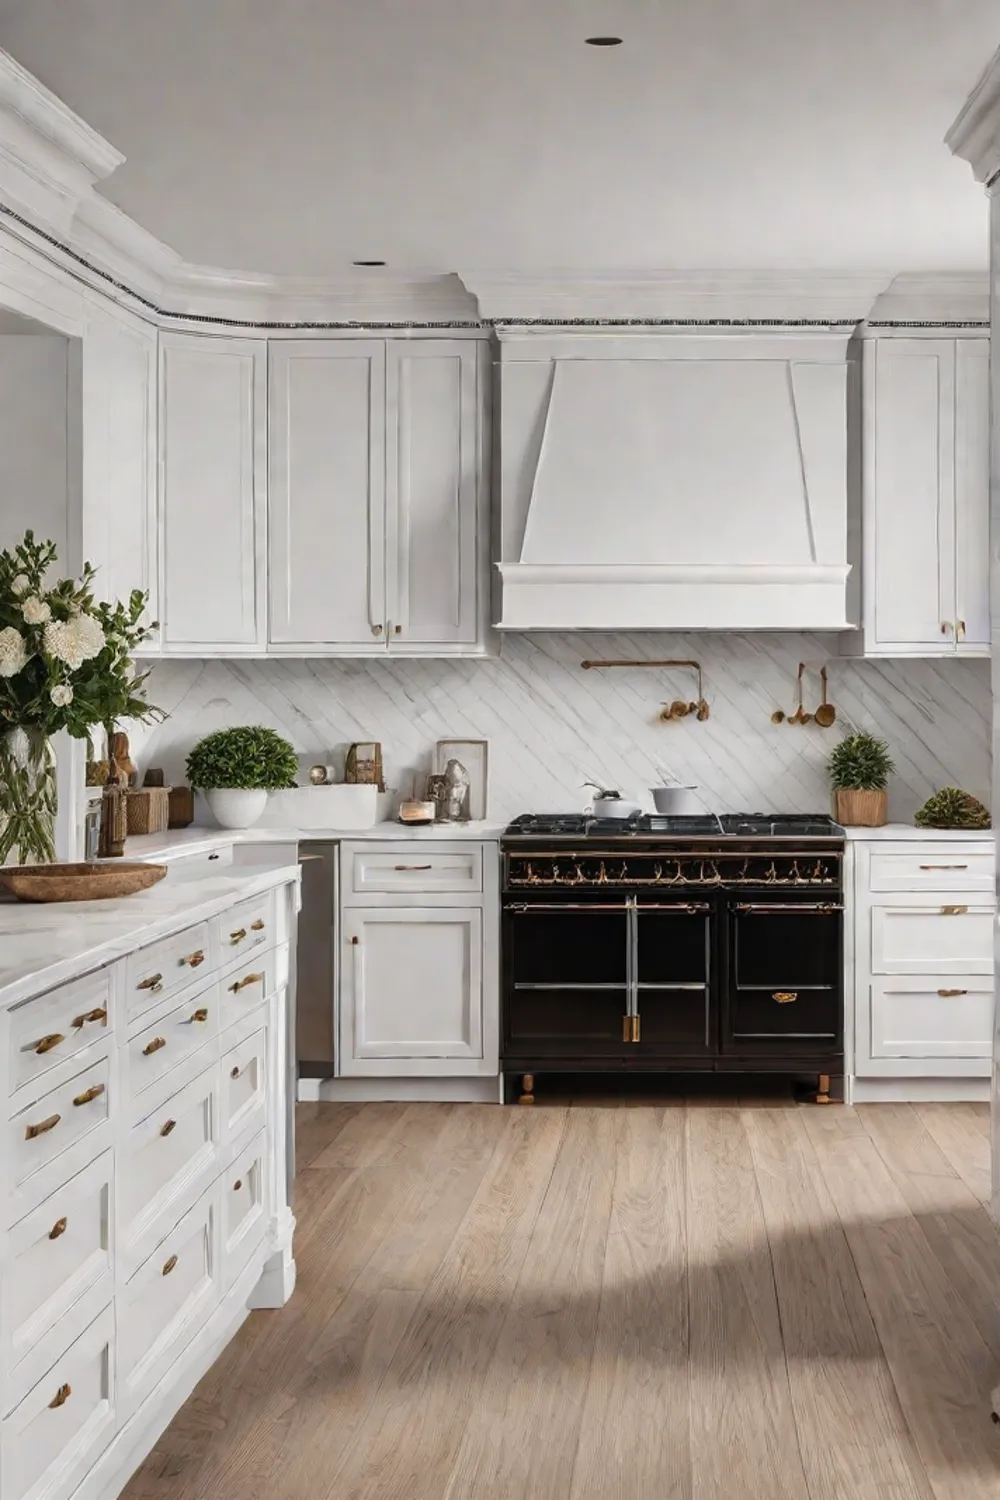 A traditional kitchen with a combination of white cabinets and natural wood